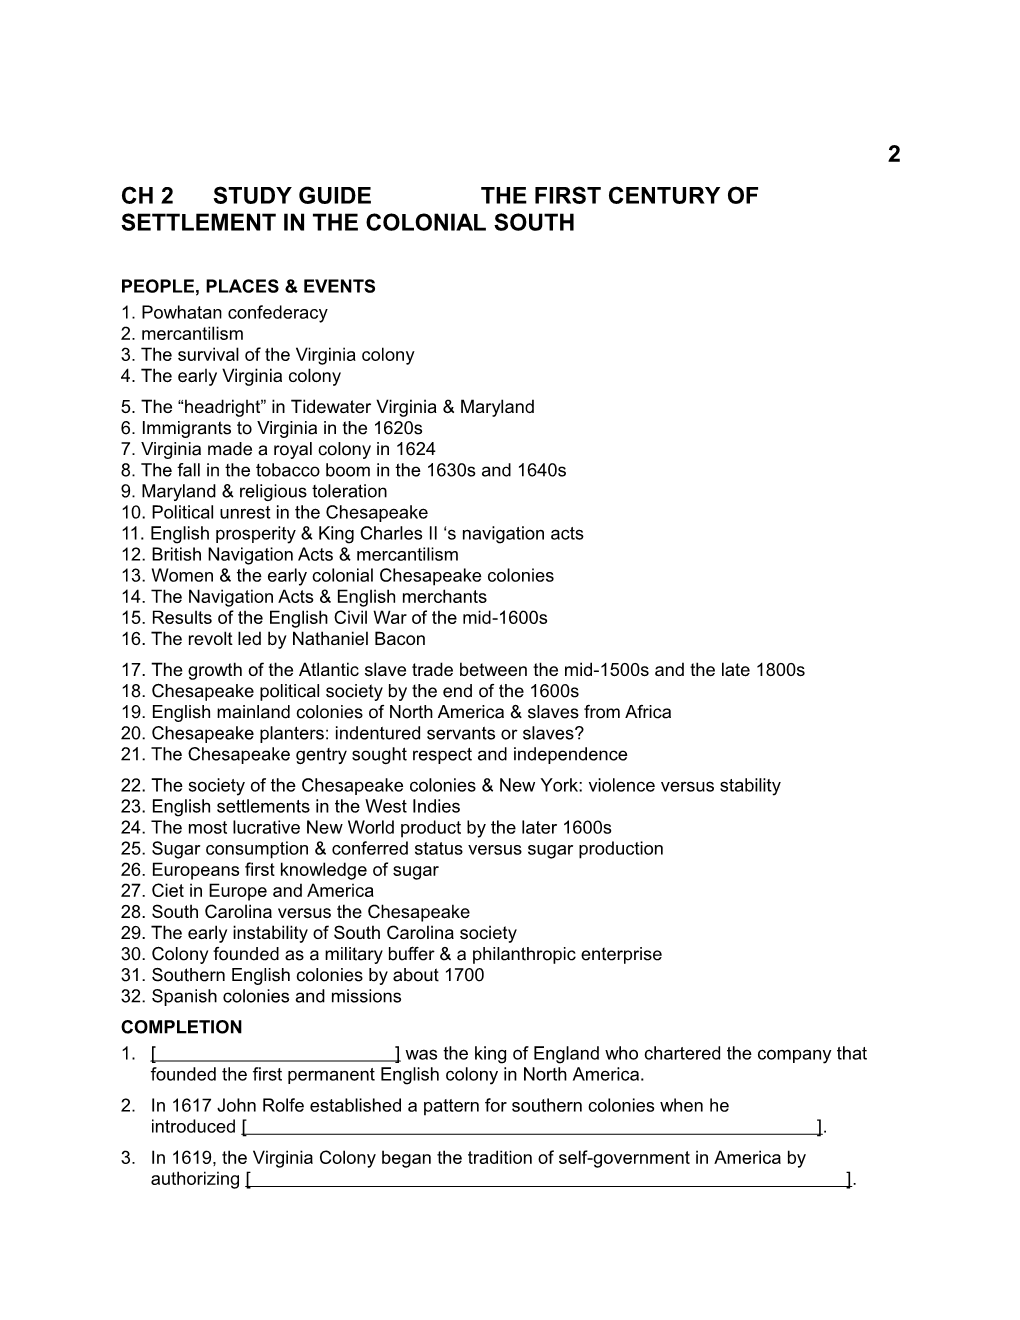 Ch 2 Study Guide the FIRST CENTURY of SETTLEMENT in the COLONIAL SOUTH